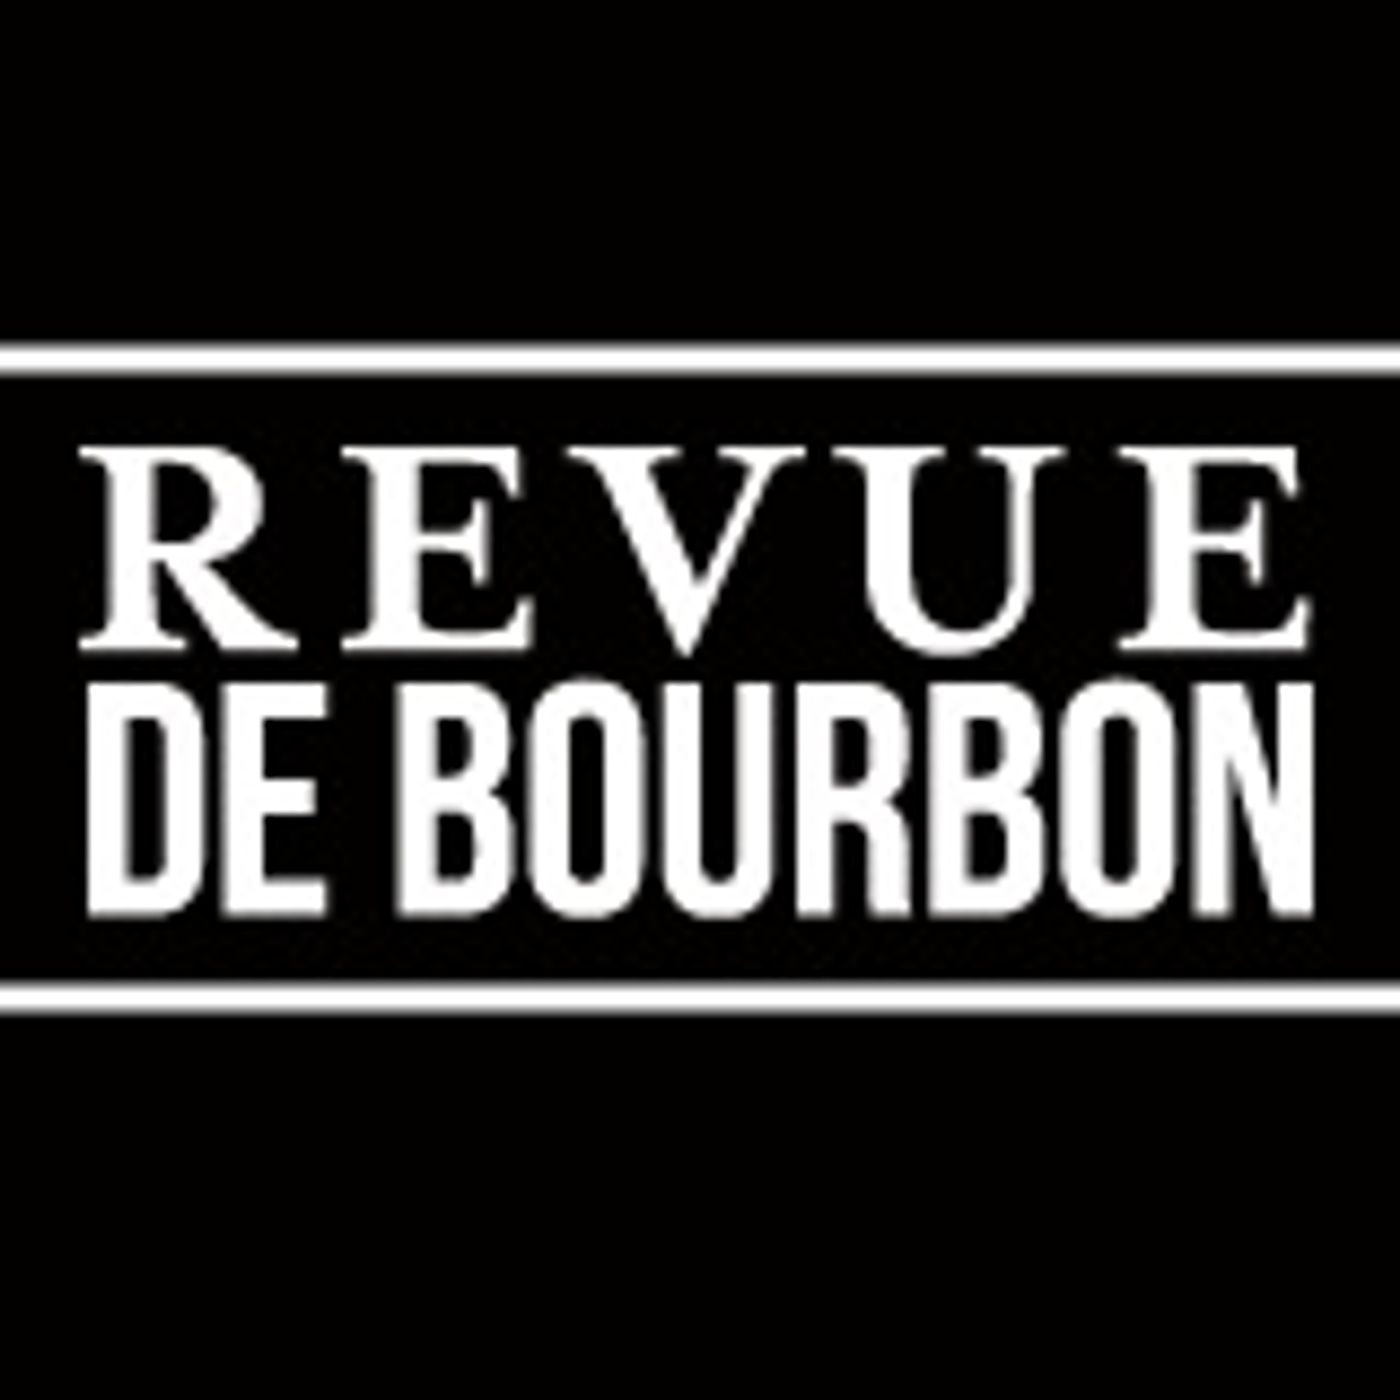 RDB: LIVE Heaven Hill Review at Doc Crow's